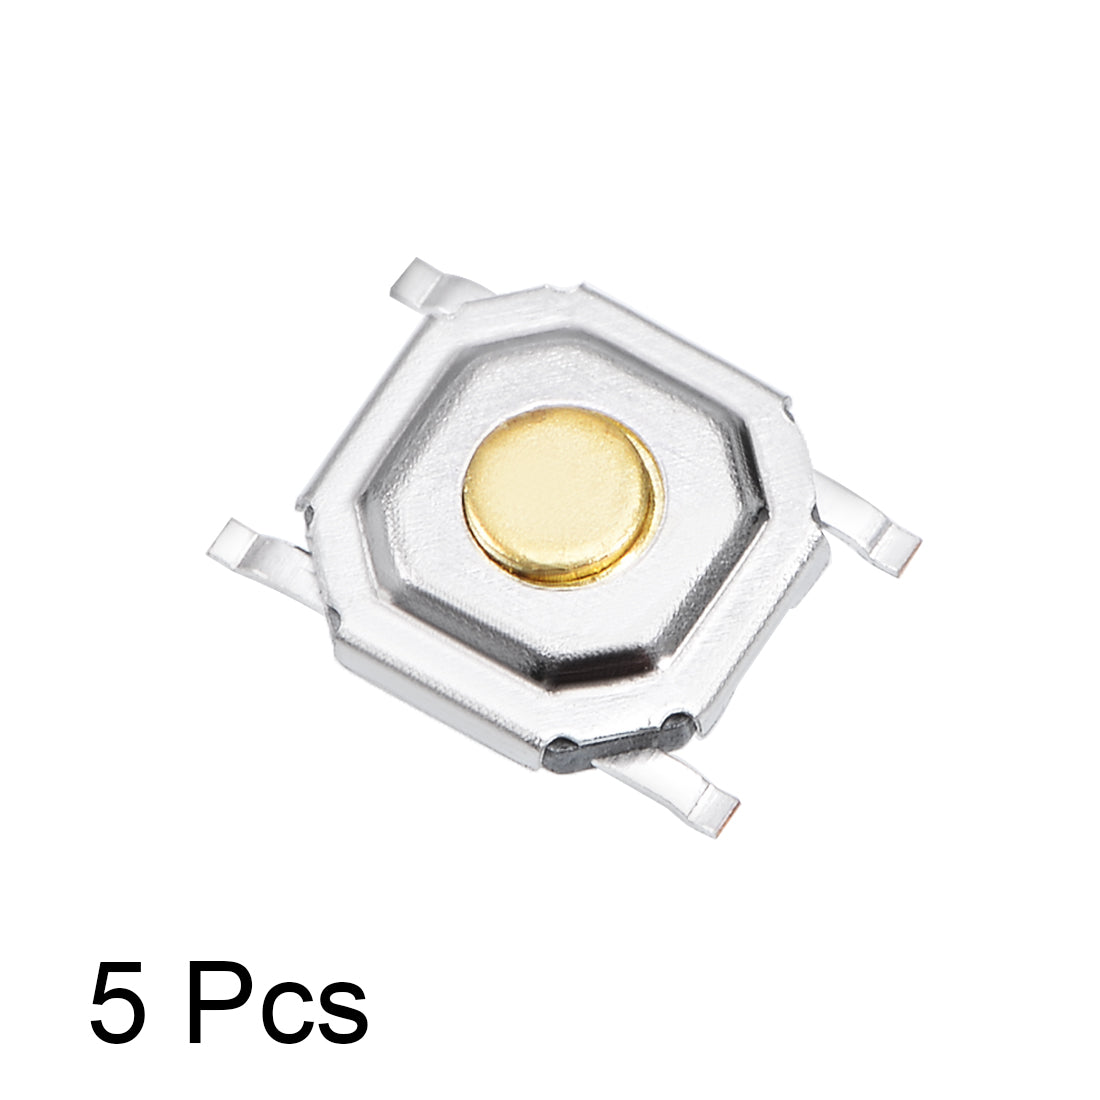 uxcell Uxcell 5PCS 5x5x1.5mm Momentary Panel PCB Surface Mounted Devices SMT Mount 4 Pins Push Button SPST Tactile Tact Switch